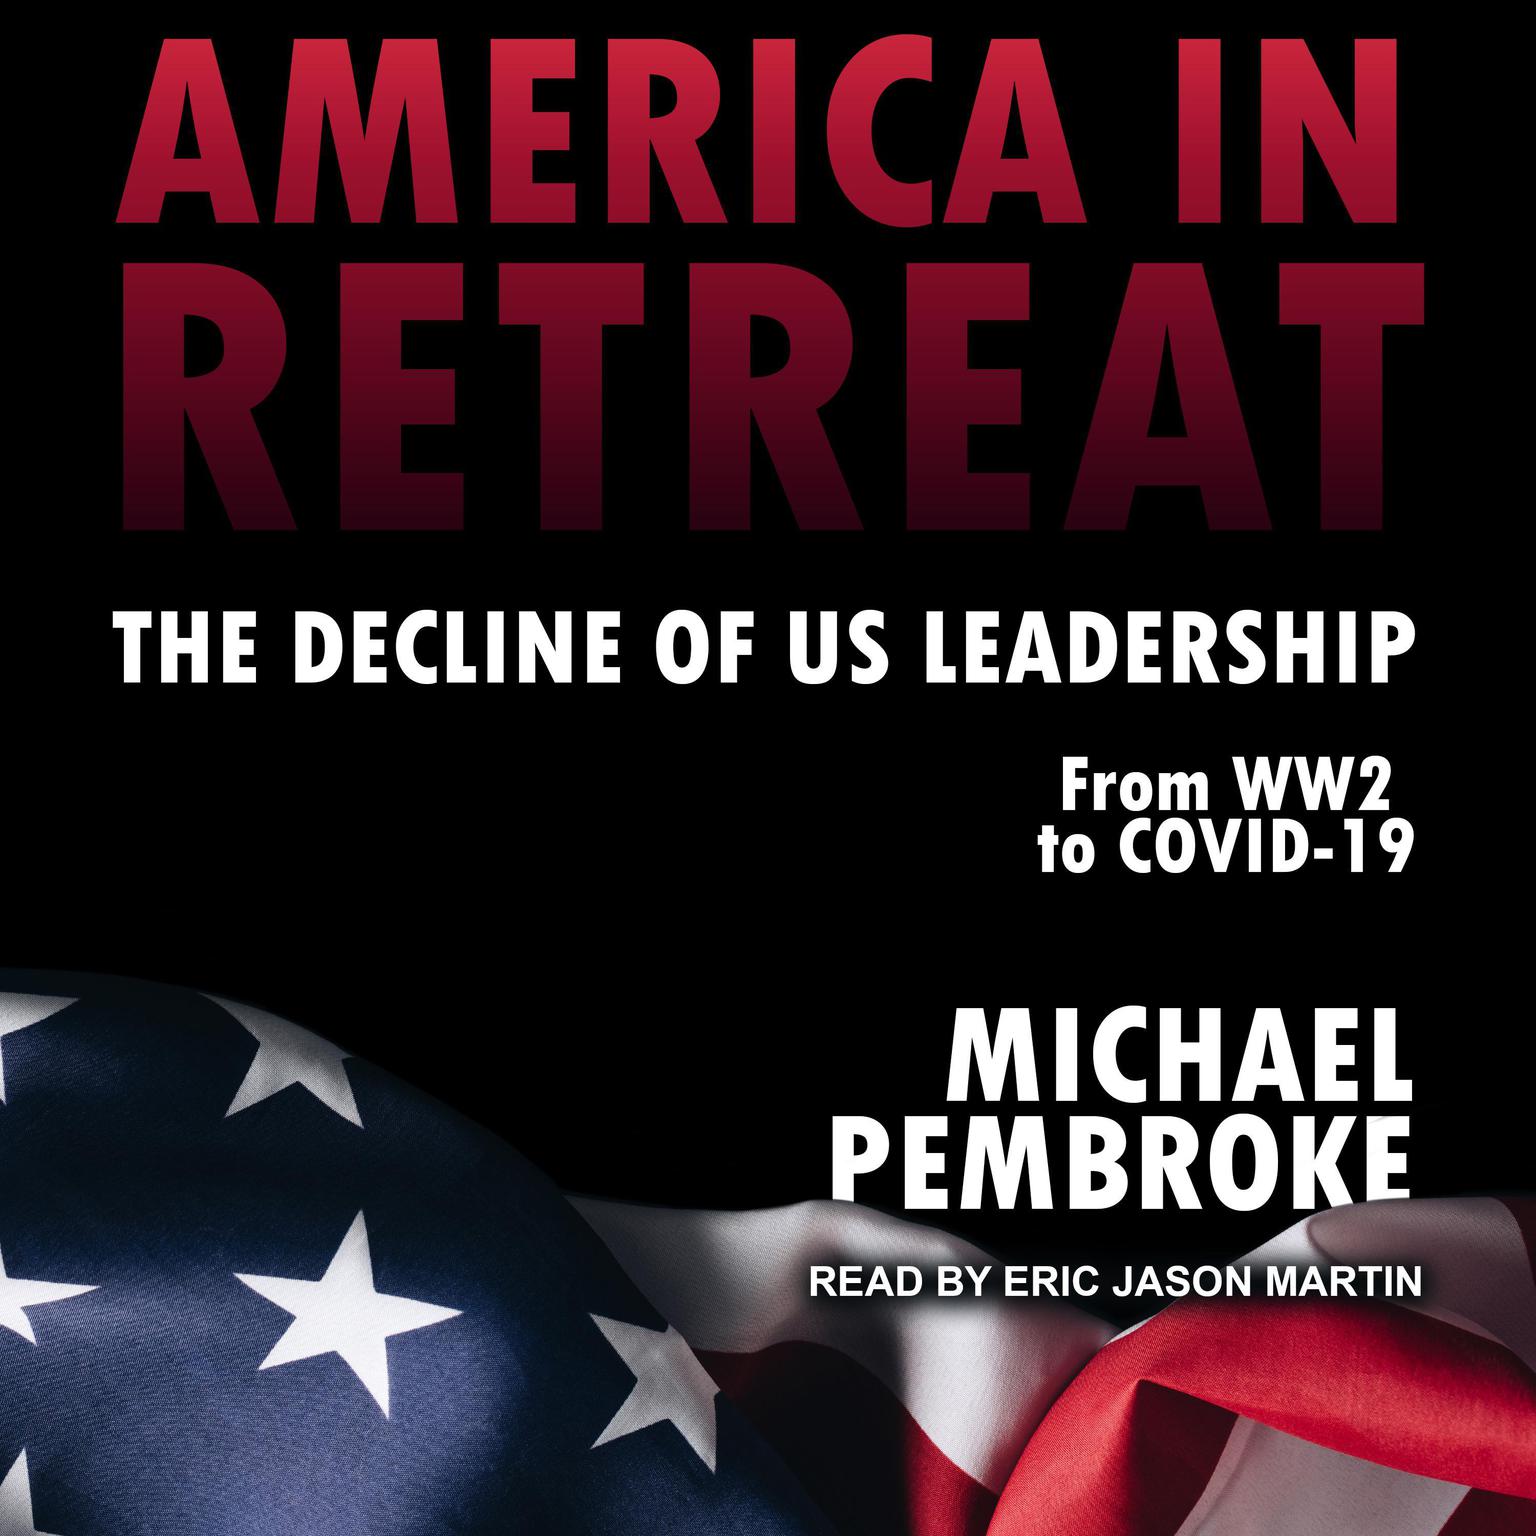 America in Retreat: The Decline of US Leadership from WW2 to Covid-19 Audiobook, by Michael Pembroke